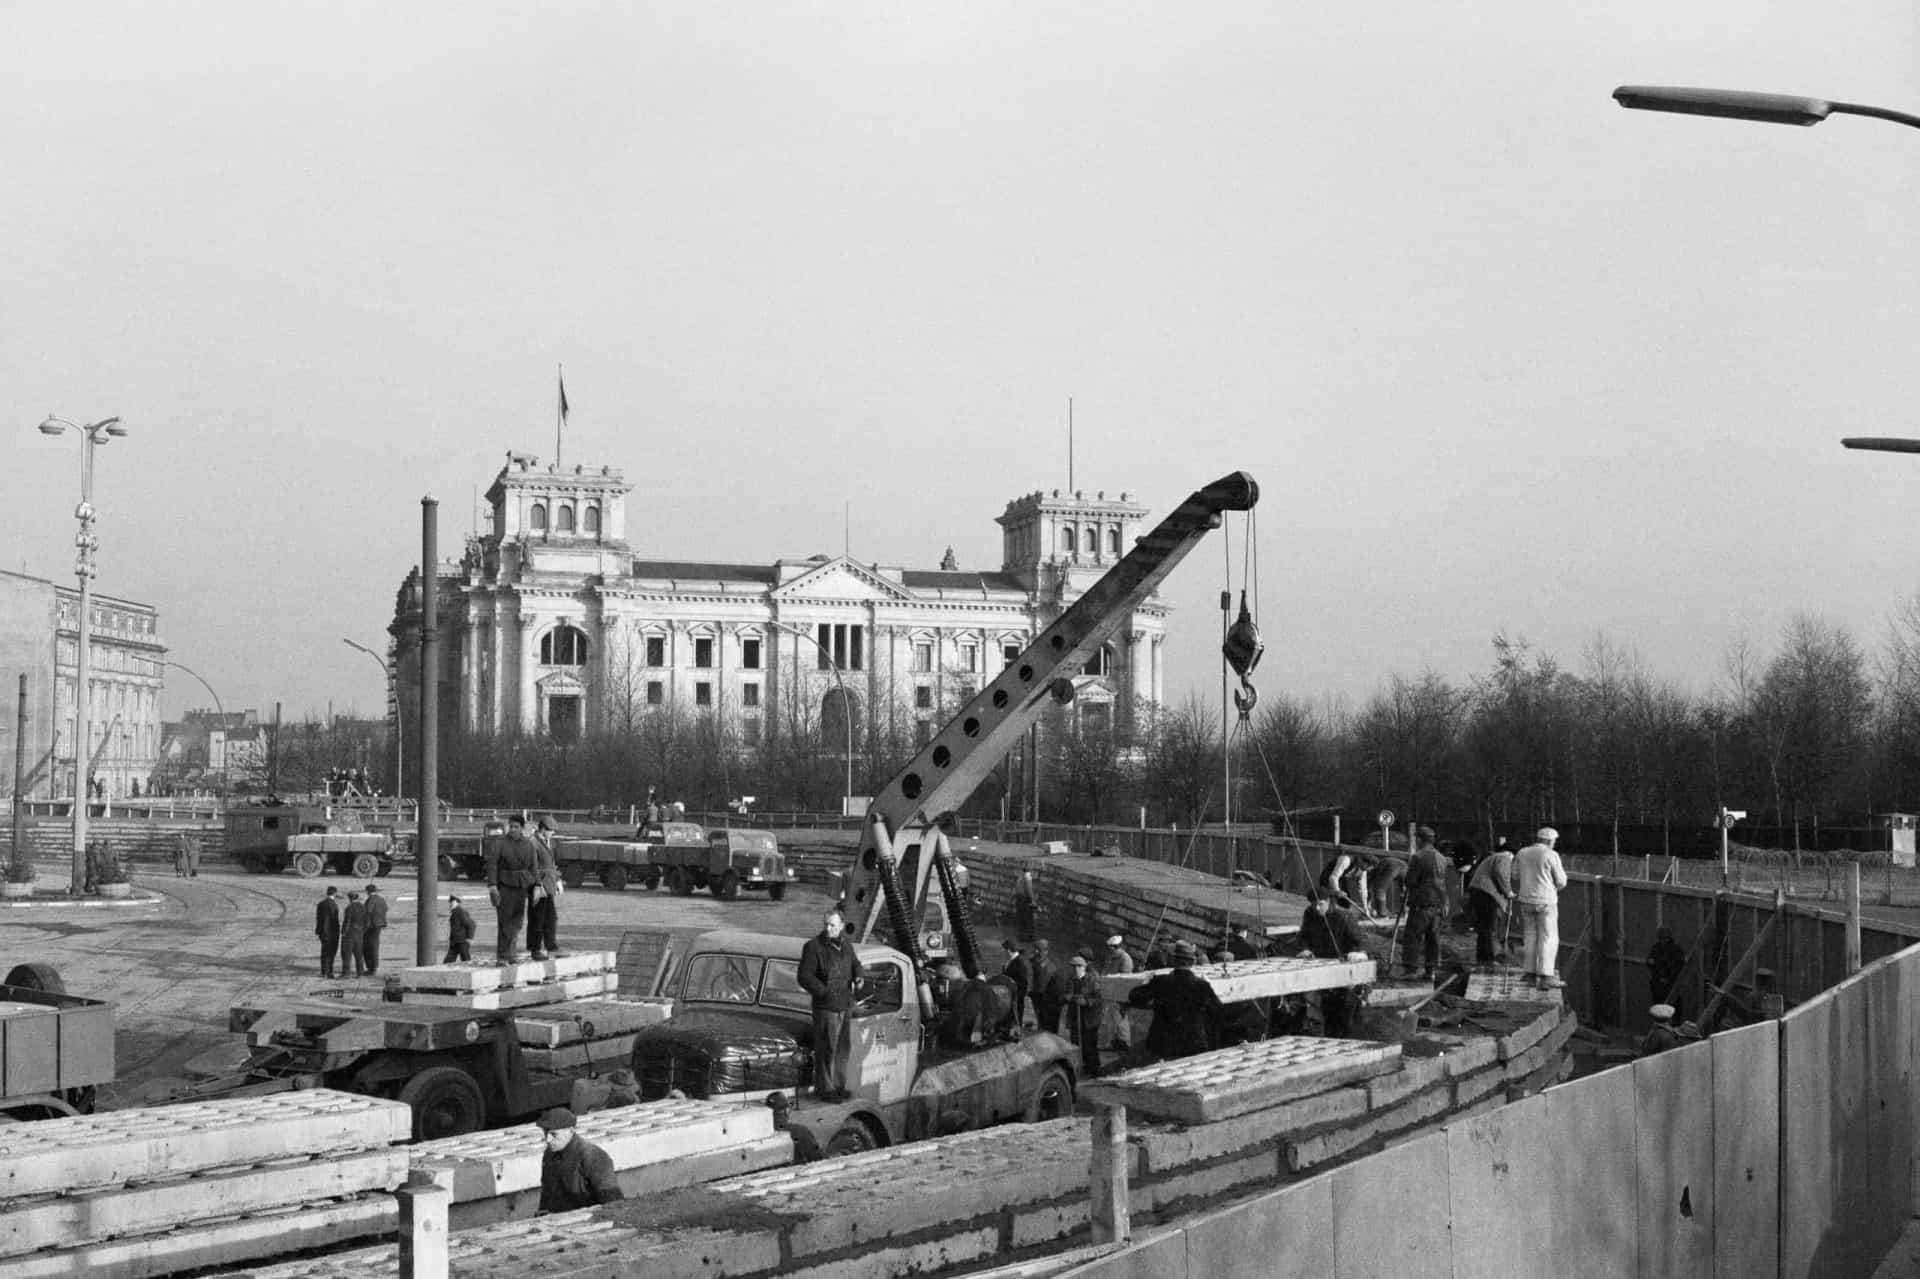 <p>Several thousand East German soldiers, policemen, militiamen, and workers turned what was originally a communist refugee wall built to stem the tide of emigrants seeking a better life in the West into a fortification designed to withstand a Western attack. The wall was strengthened in key areas of the city, including in this location near the Reichstag Building.</p><p>You may also like: <a href="https://www.starsinsider.com/n/463285?utm_source=msn.com&utm_medium=display&utm_campaign=referral_description&utm_content=509600en-us">The most famous pansexual celebrities in showbiz</a></p>